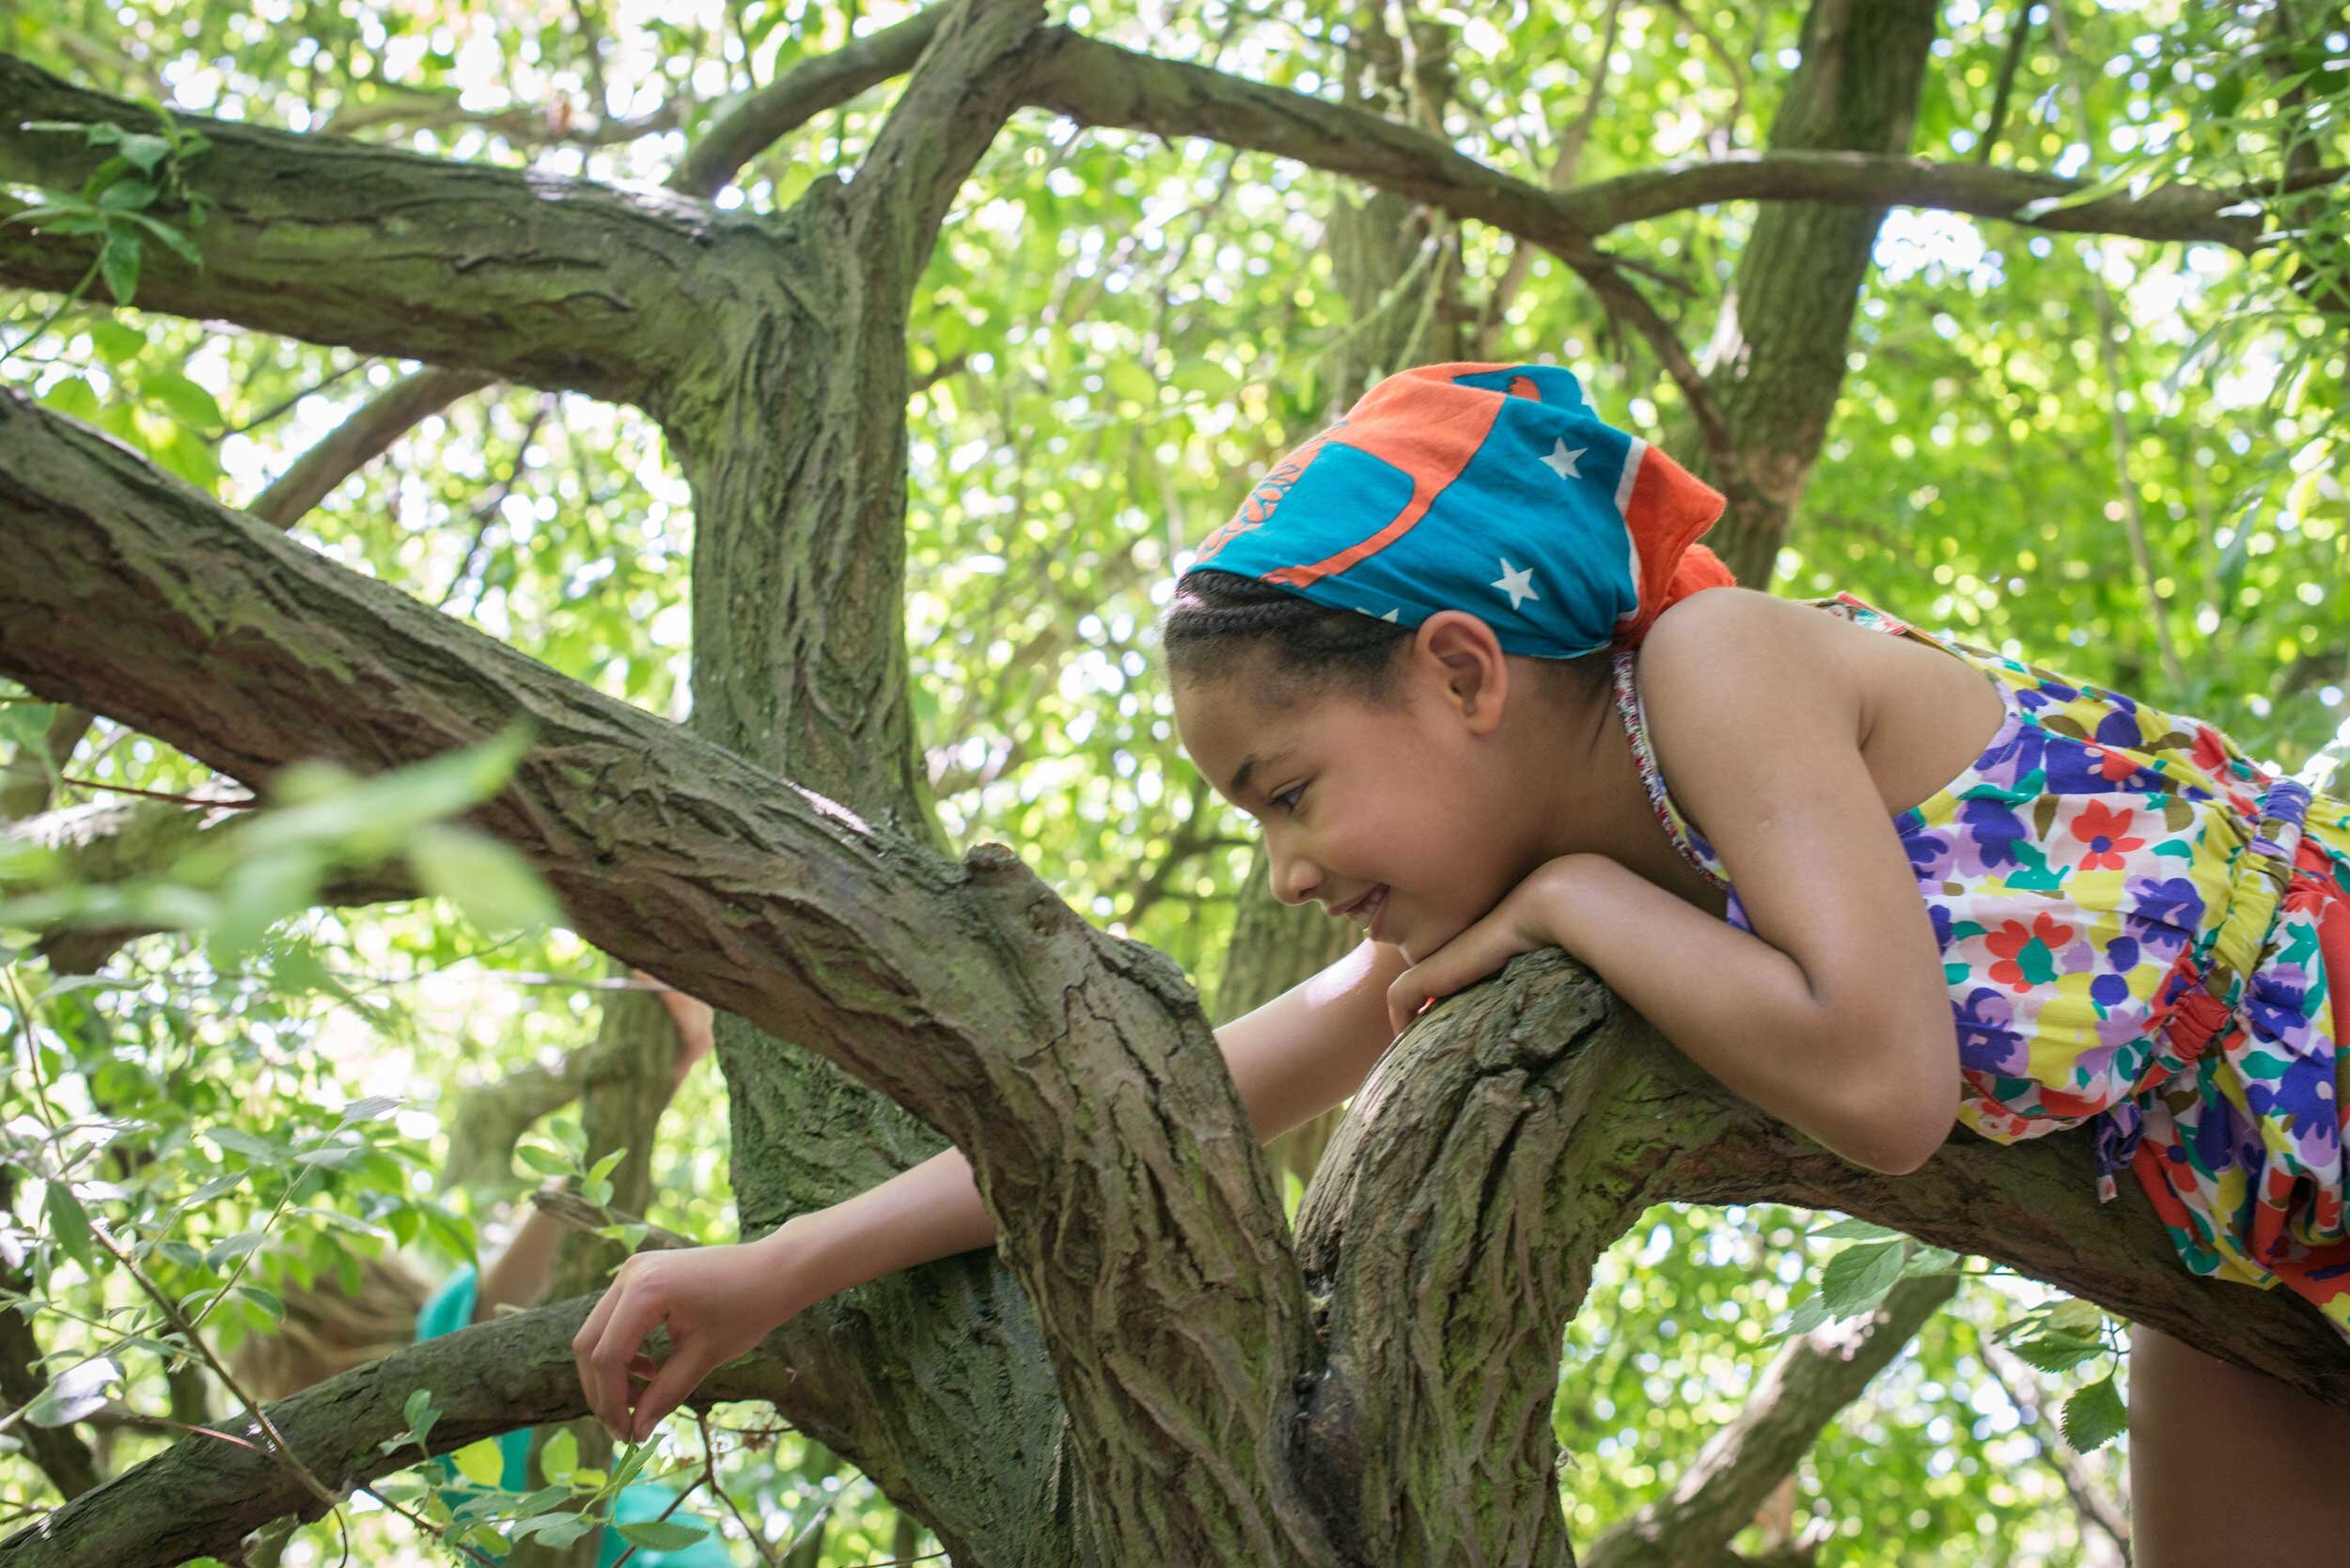  Lee Valley Park. WaterWorks Centre Nature Reserve, London E10, UK. Girl in tree.  Shot by Eleanor Bentall, photographer.  